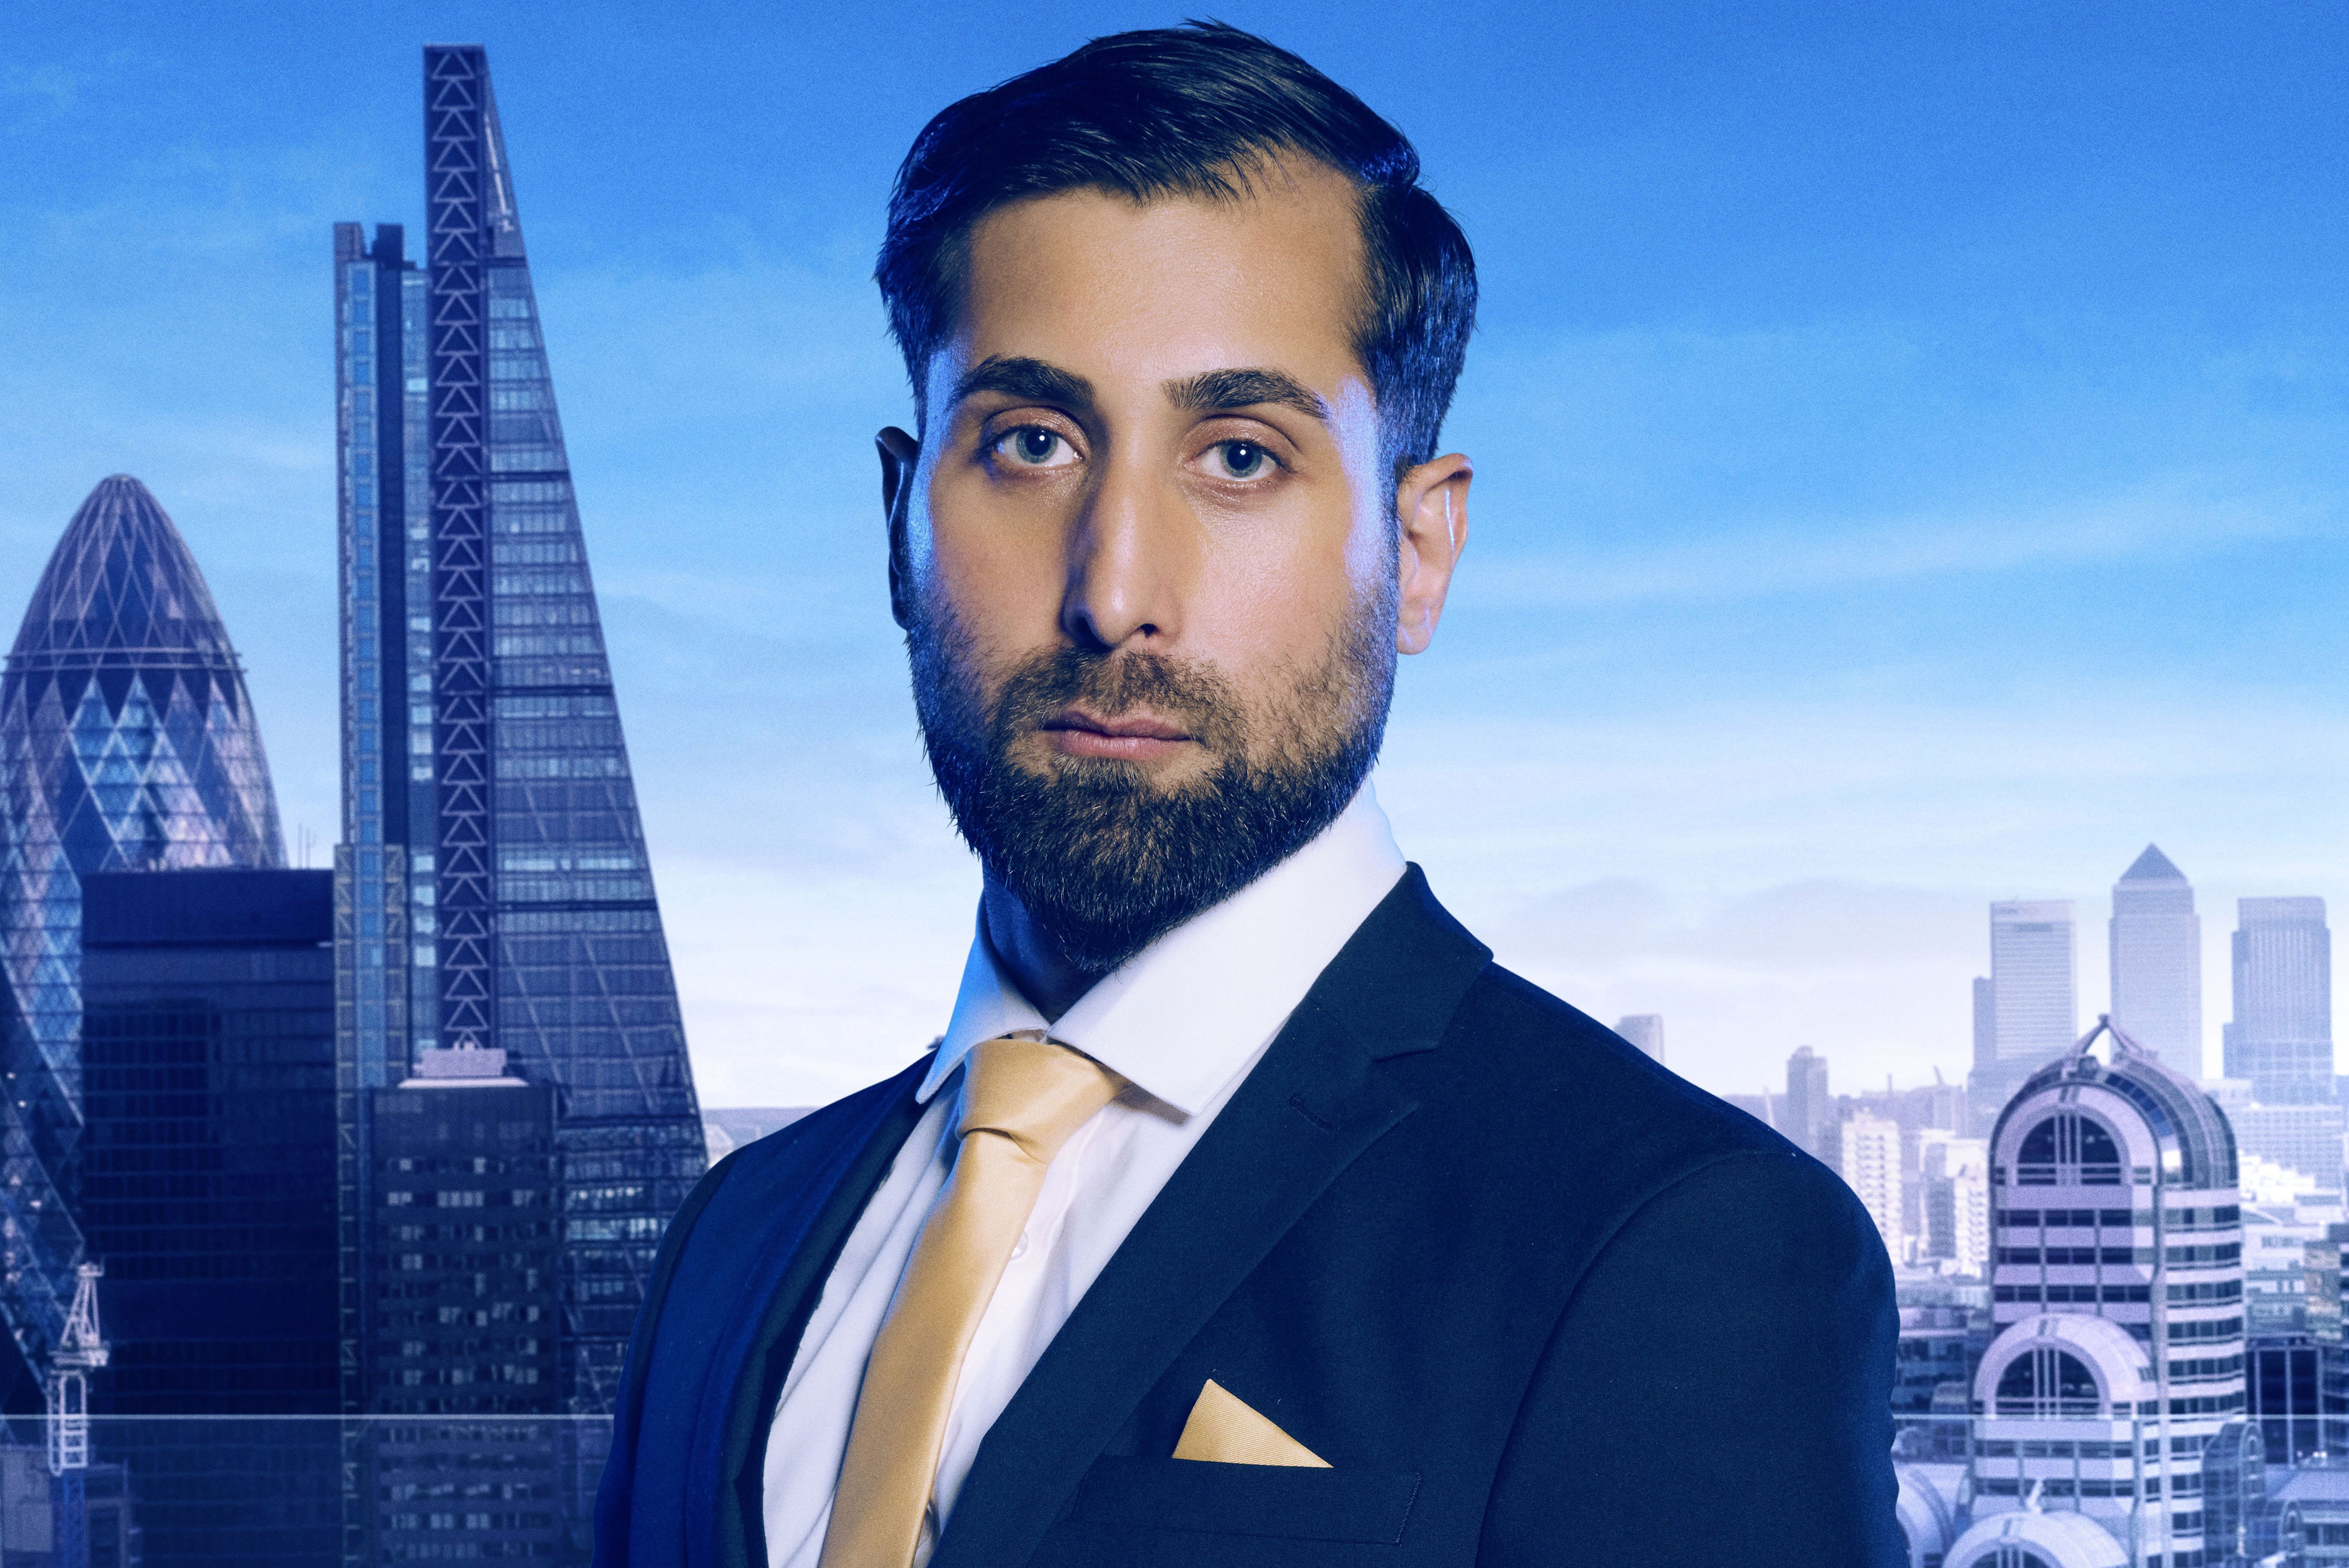 bbc records then cuts ‘you're fired' scenes of ‘apprentice' contestant accused of antisemitic posts following backlash